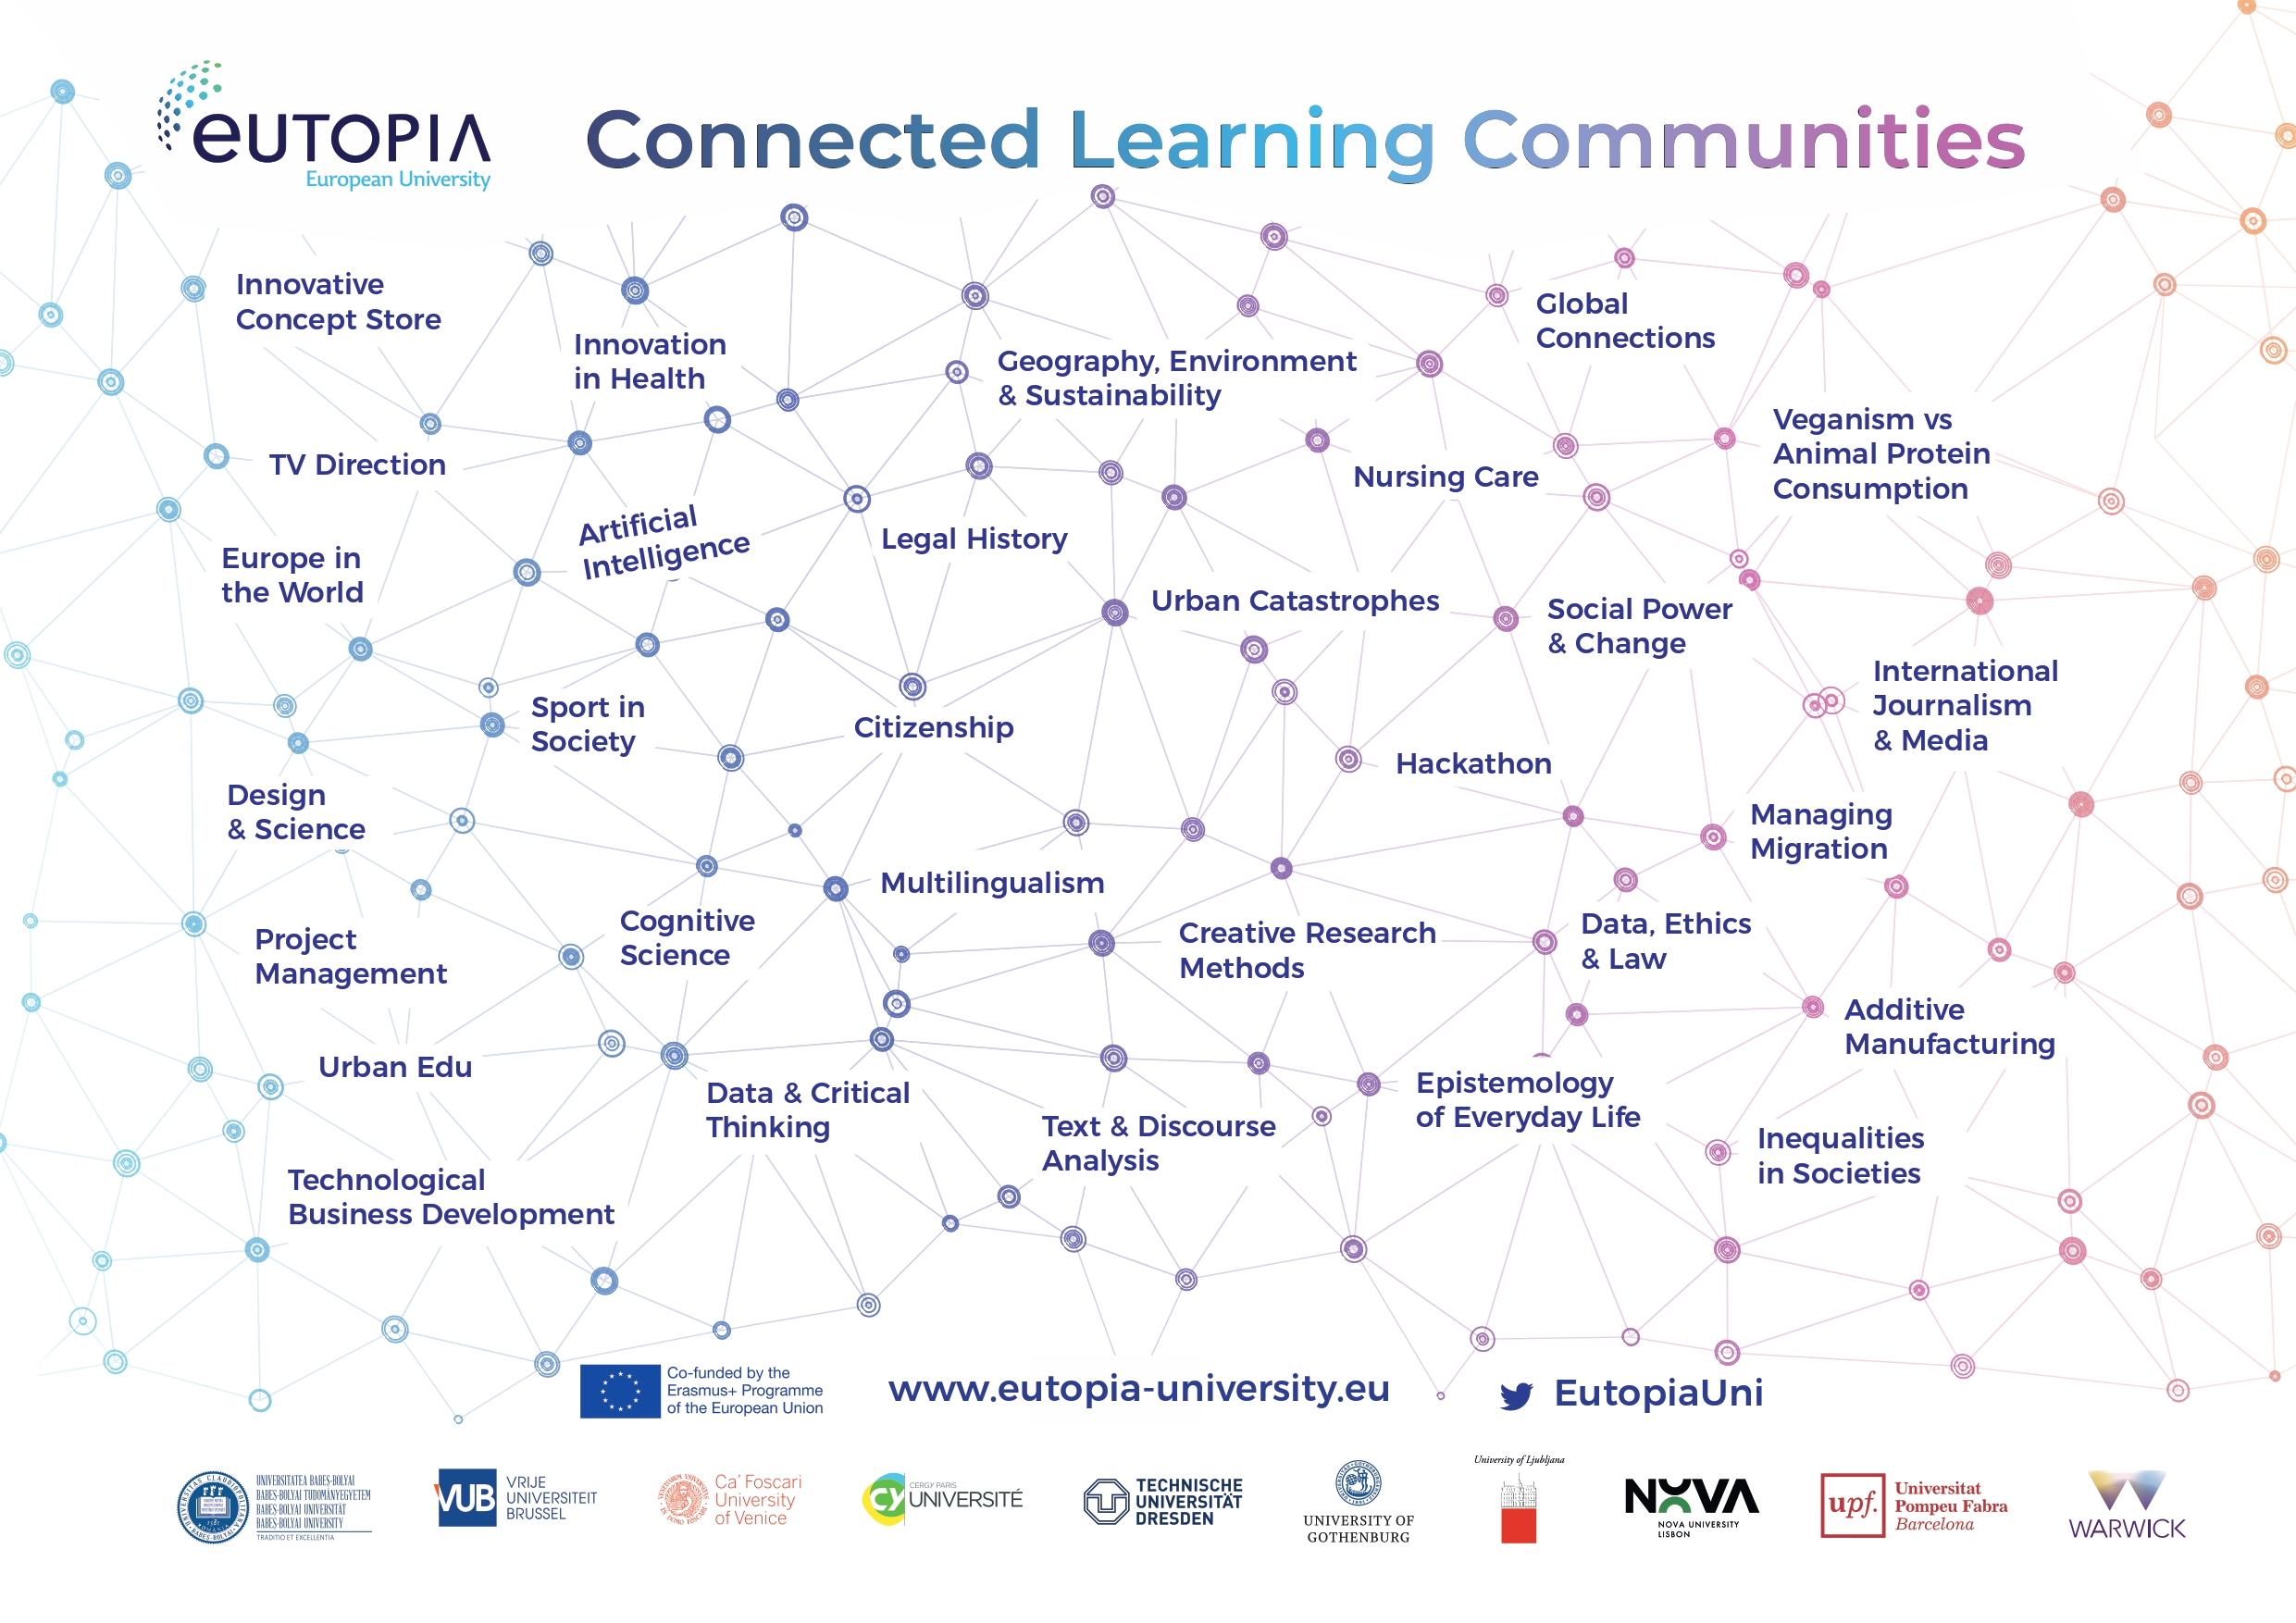 Calls are now open for Leads for Connected Communities of the EUTOPIA MORE project